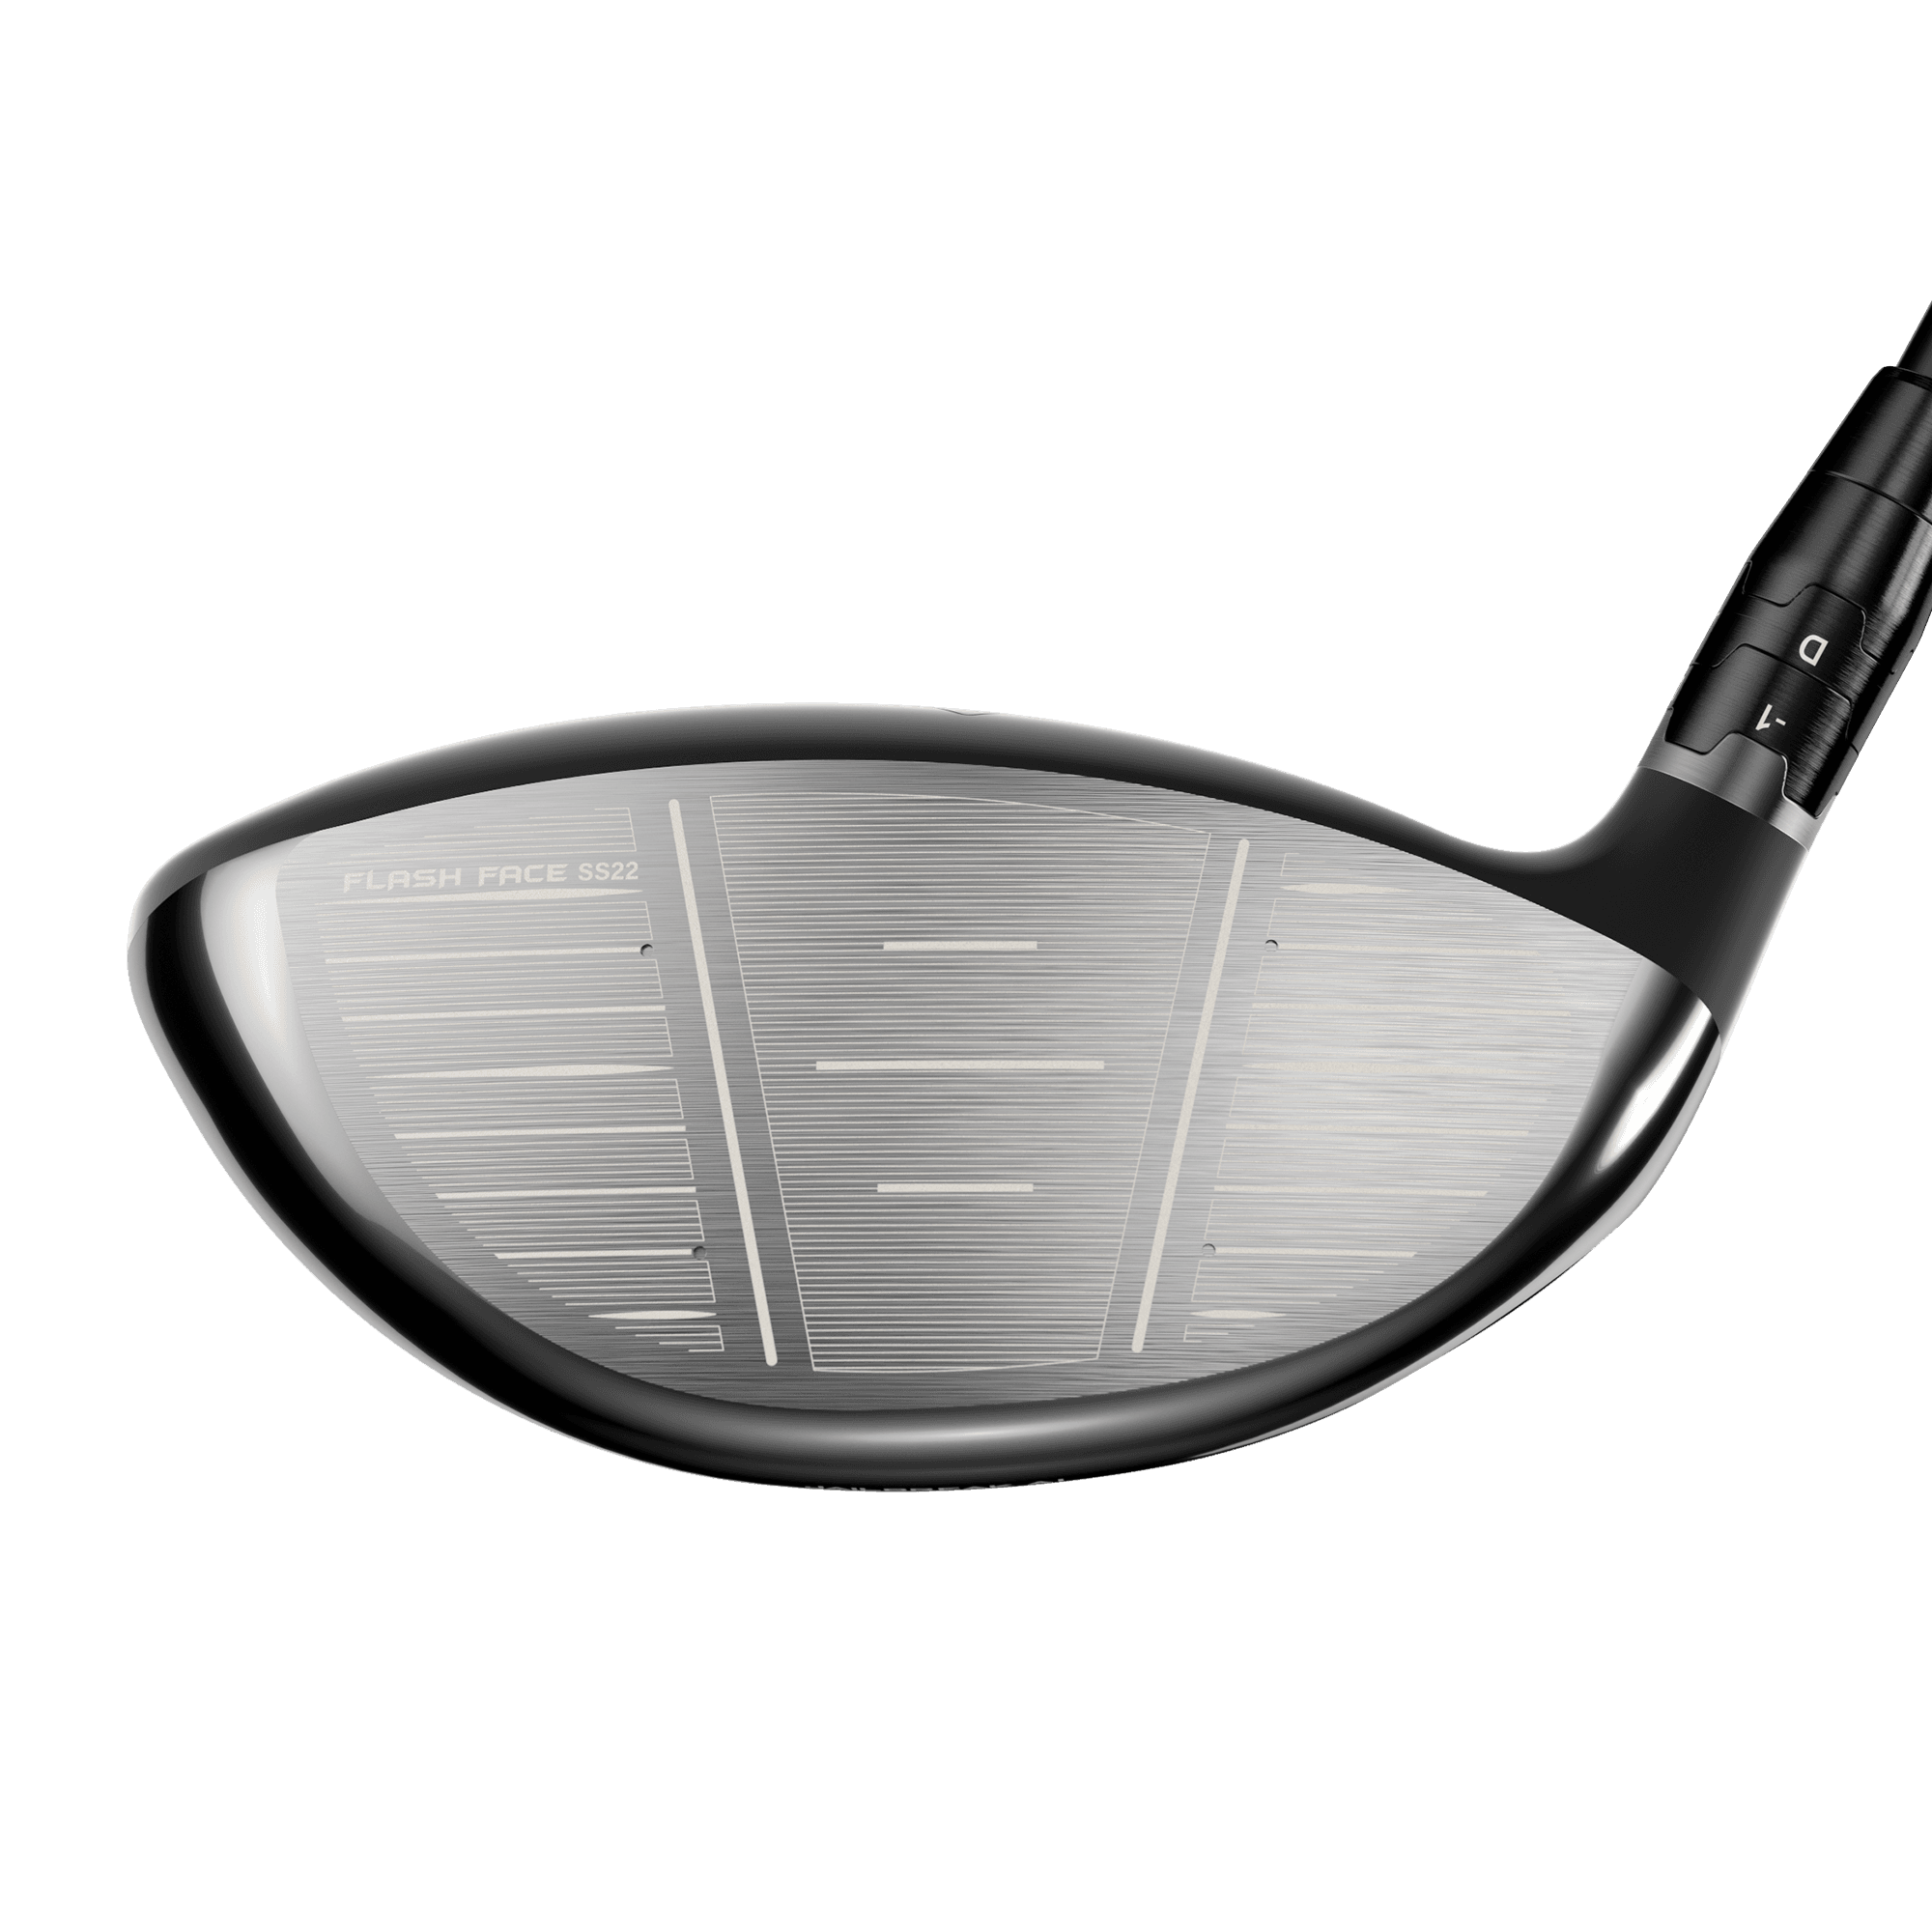 Rogue ST MAX Drivers | Callaway Golf Pre-Owned